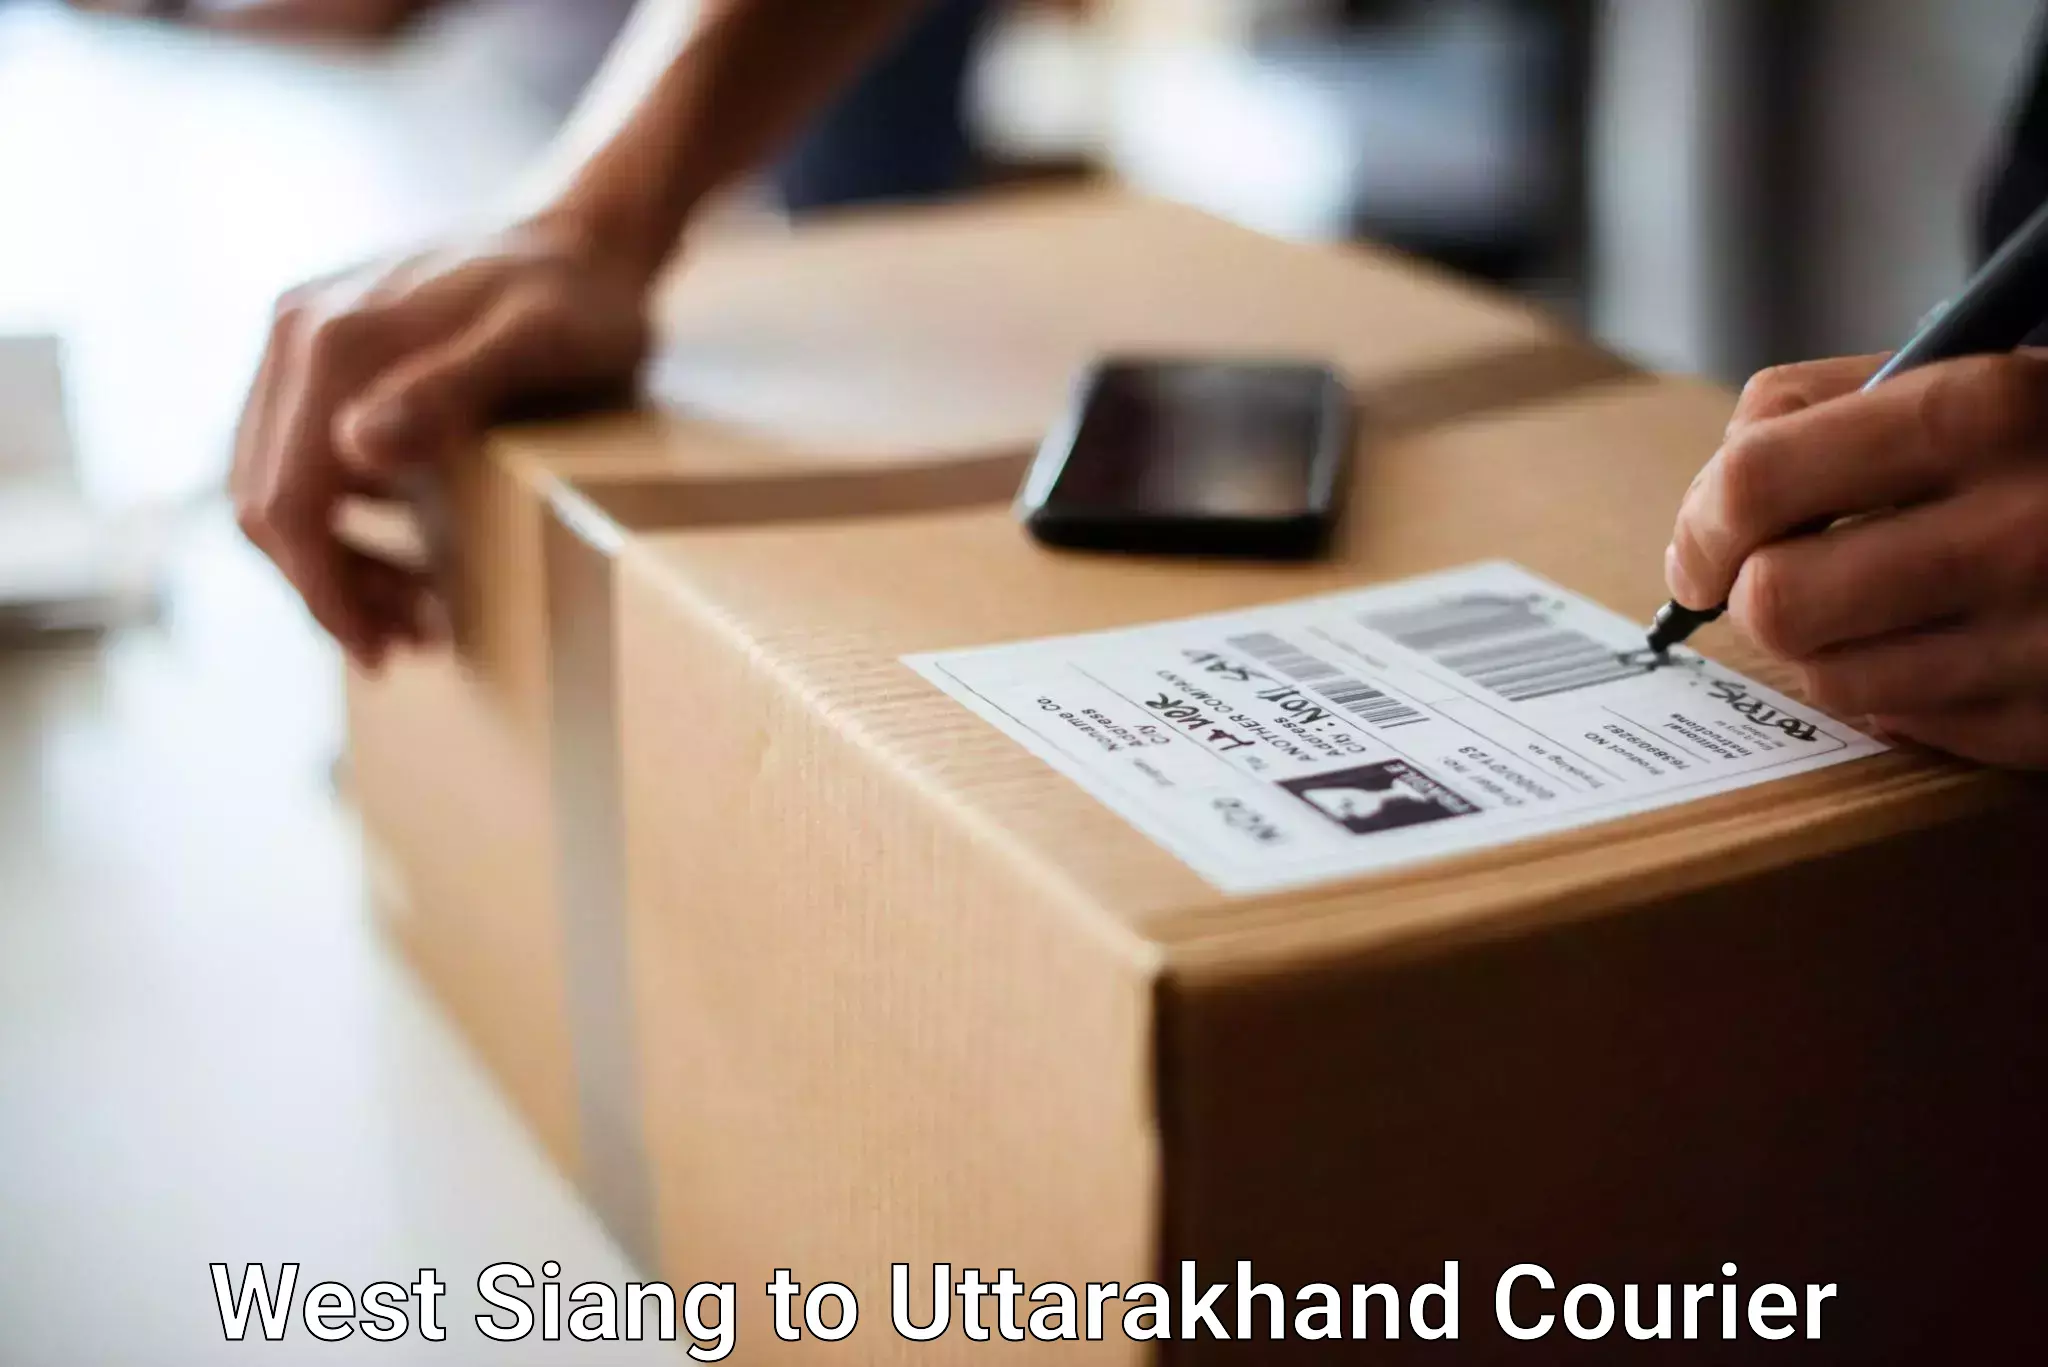 Luggage delivery app West Siang to Uttarakhand